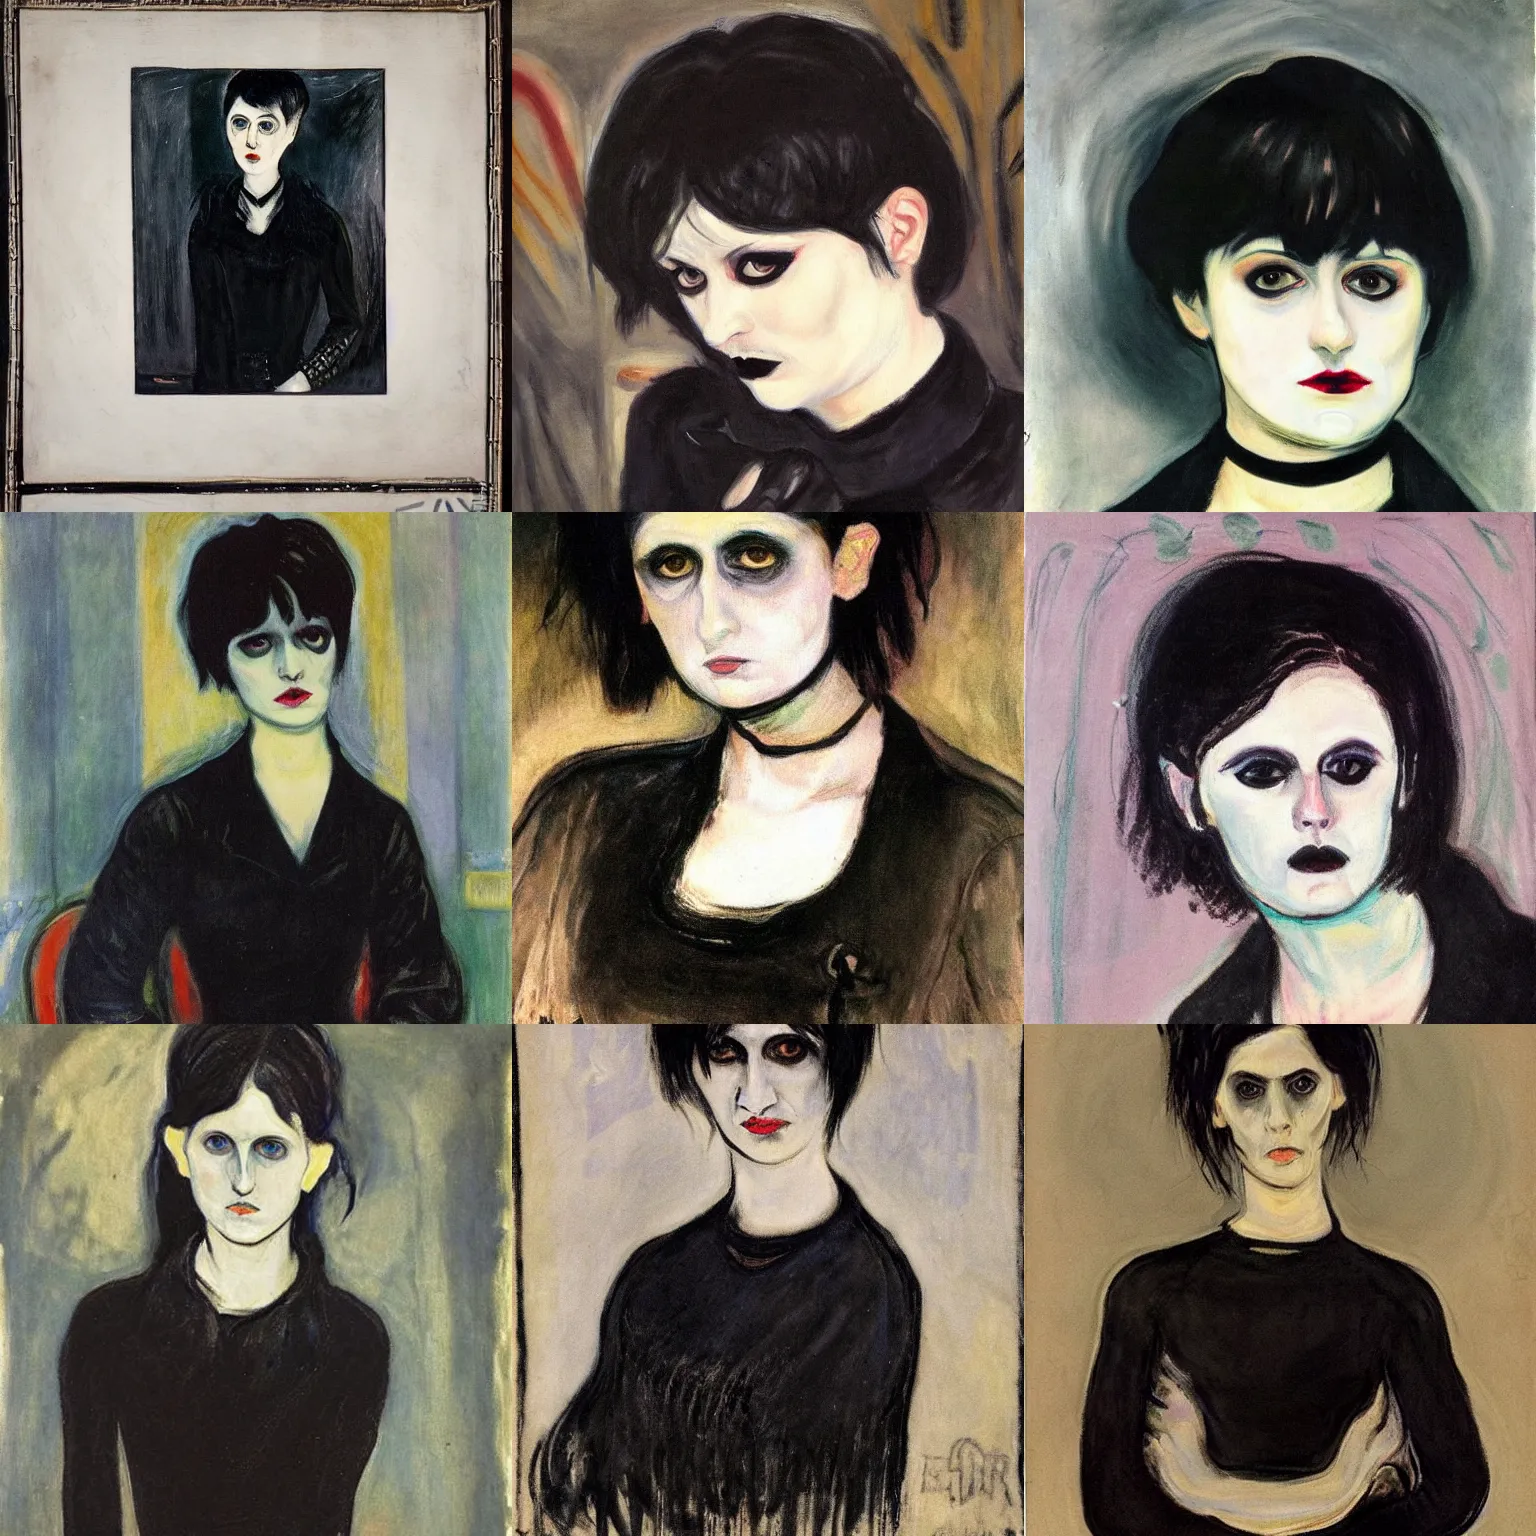 Prompt: A goth portrait painted by Edvard Munch. Her hair is dark brown and cut into a short, messy pixie cut. She has a slightly rounded face, with a pointed chin, large entirely-black eyes, and a small nose. She is wearing a black tank top, a black leather jacket, a black knee-length skirt, a black choker, and black leather boots.